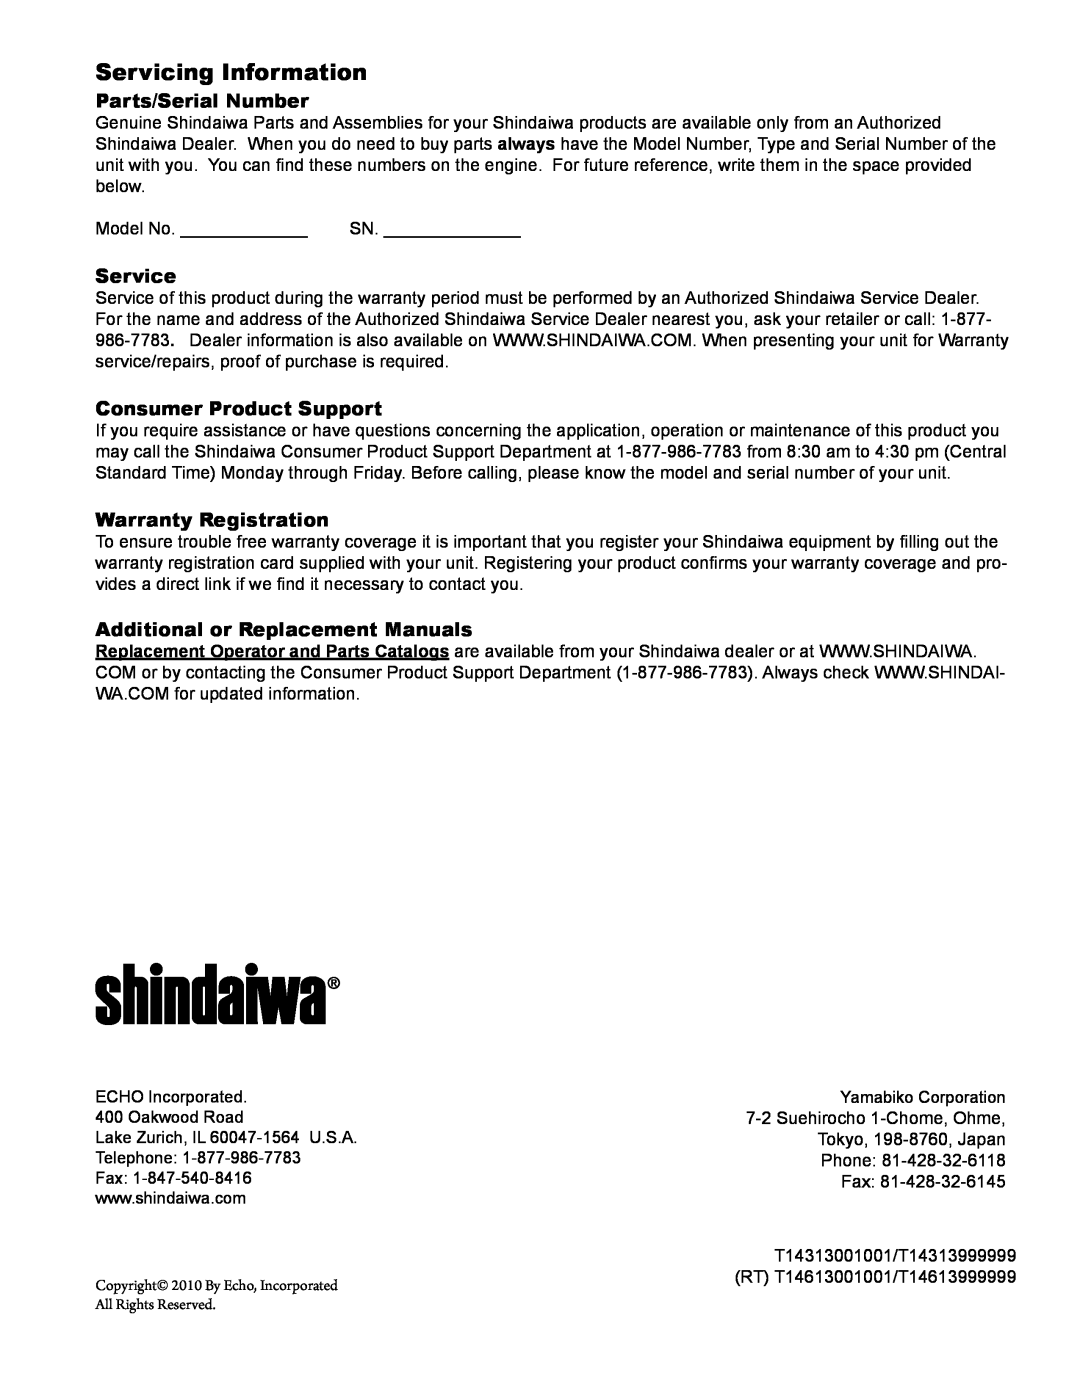 Shindaiwa X7501970601 Servicing Information, Parts/Serial Number, Service, Consumer Product Support, Warranty Registration 